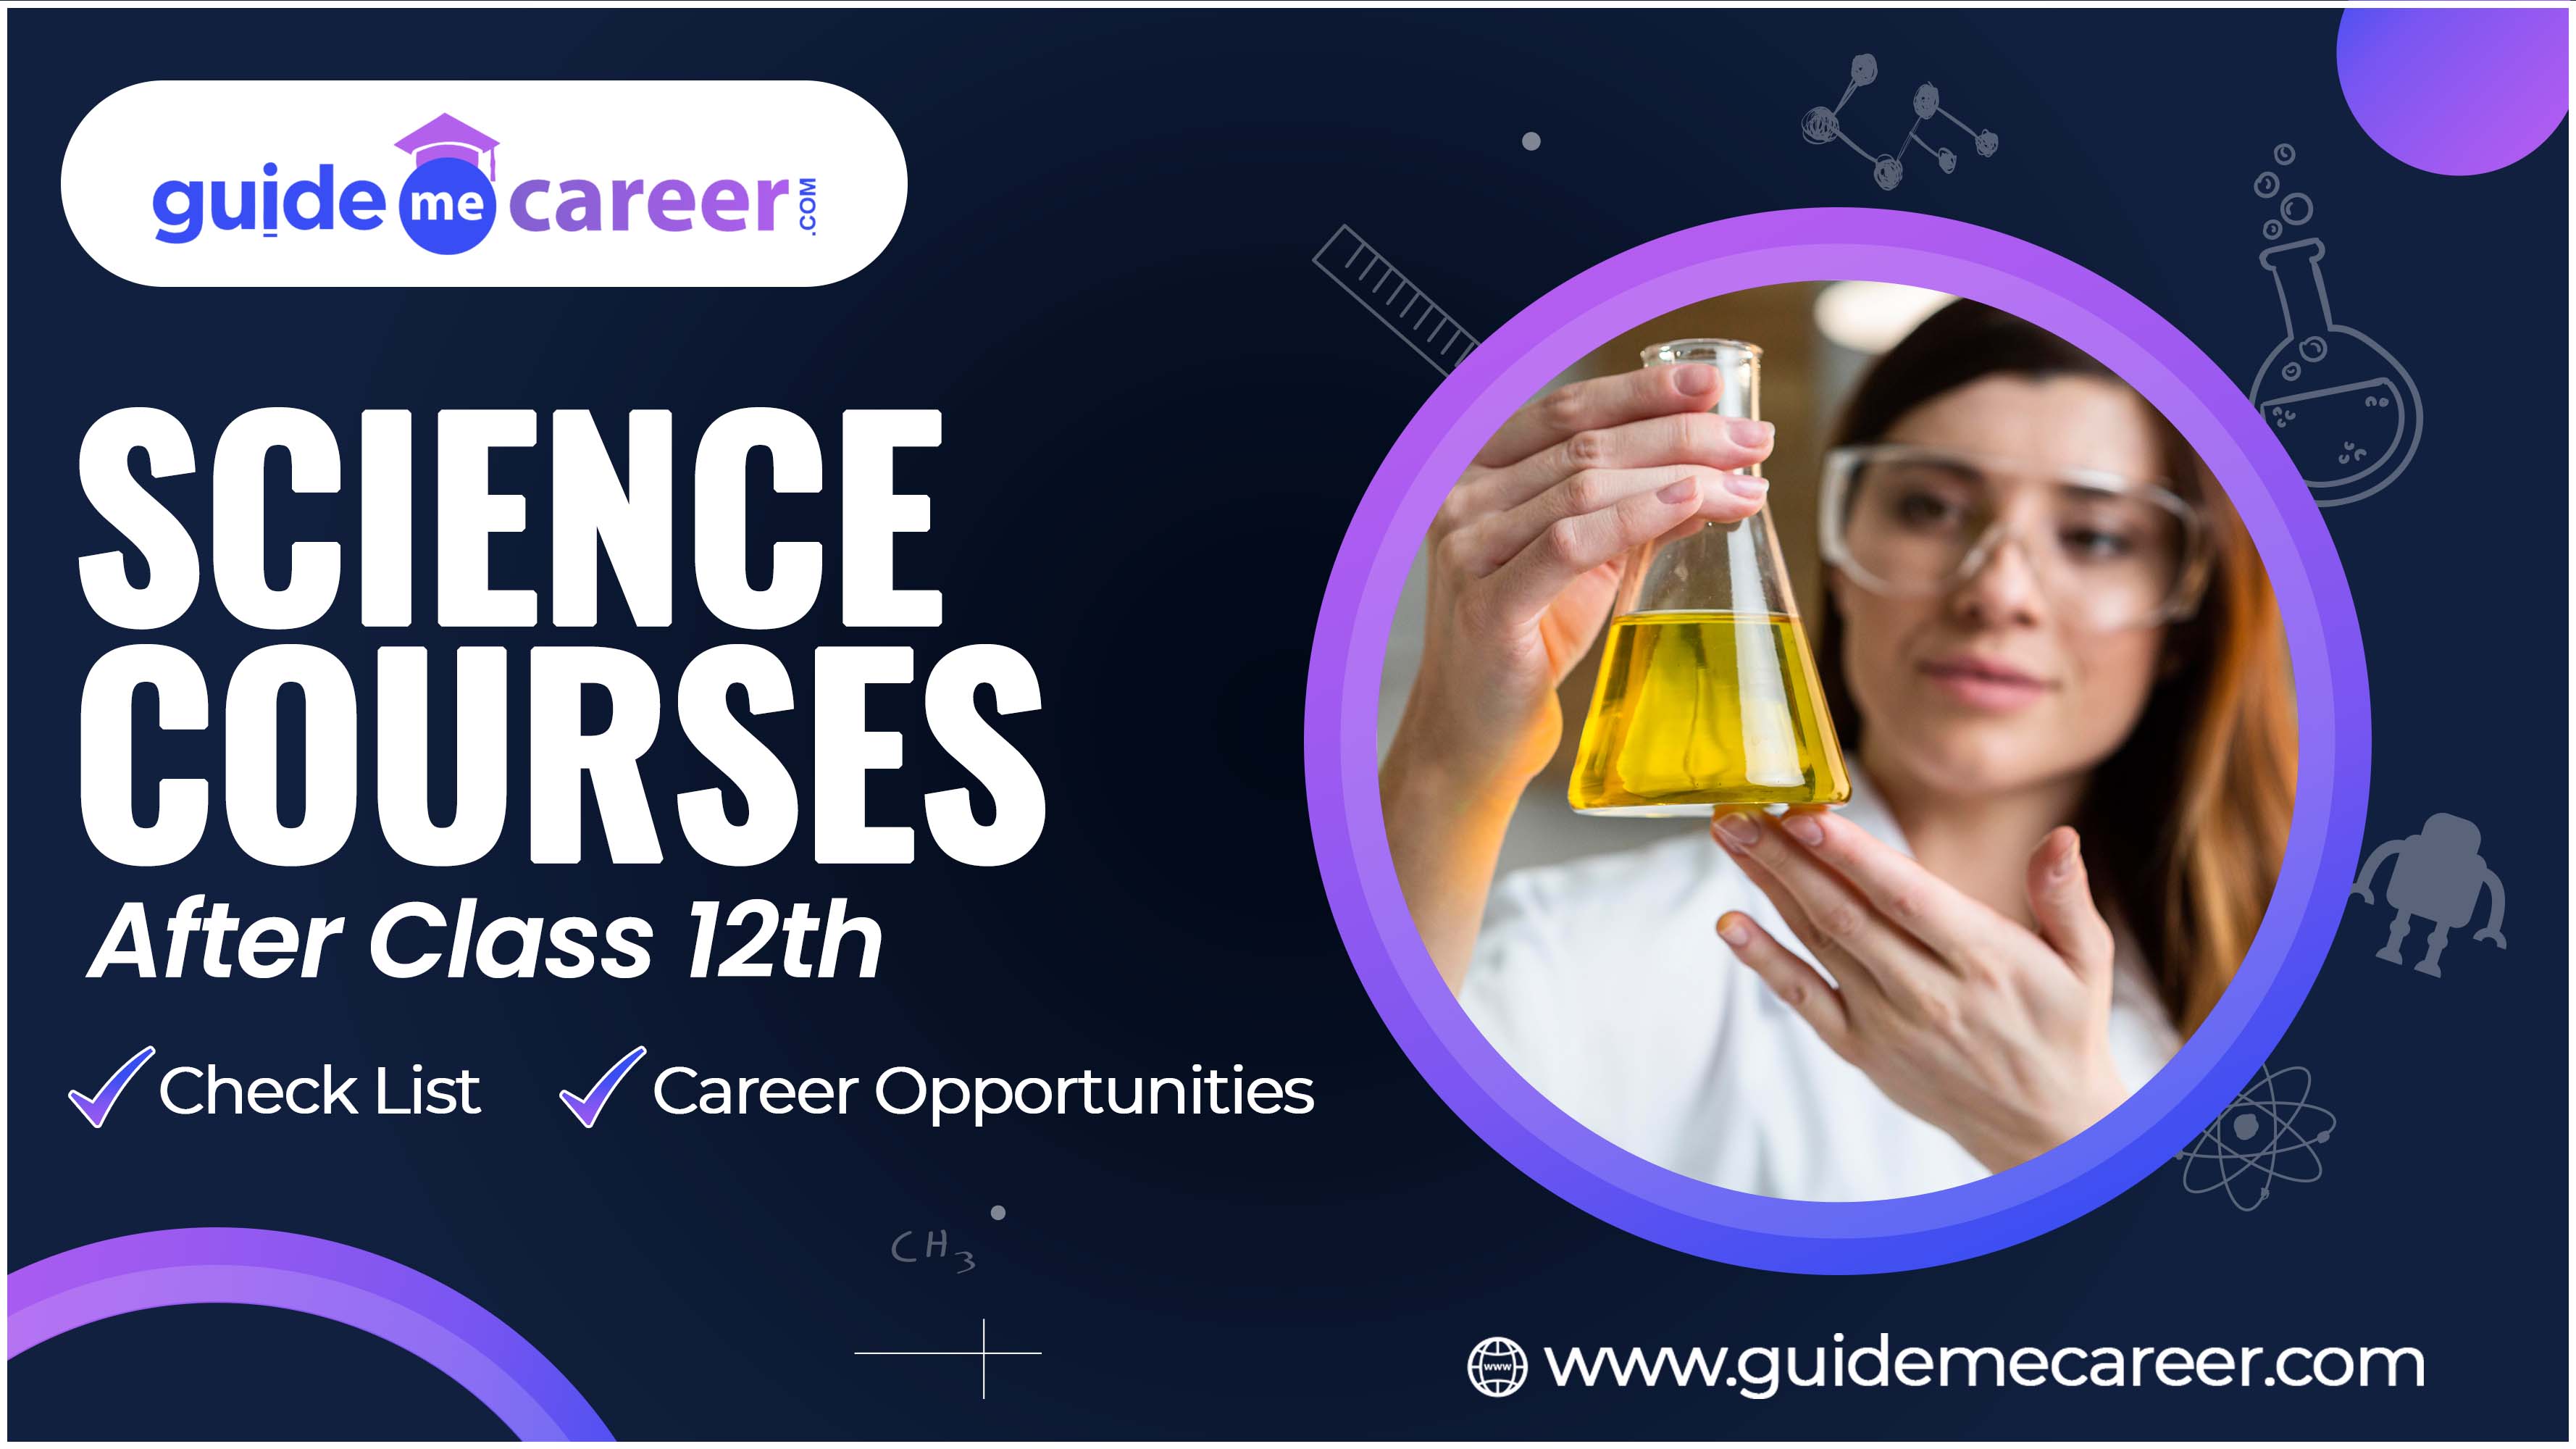 Level-Up Your Career with Top Science Courses After Class 12th